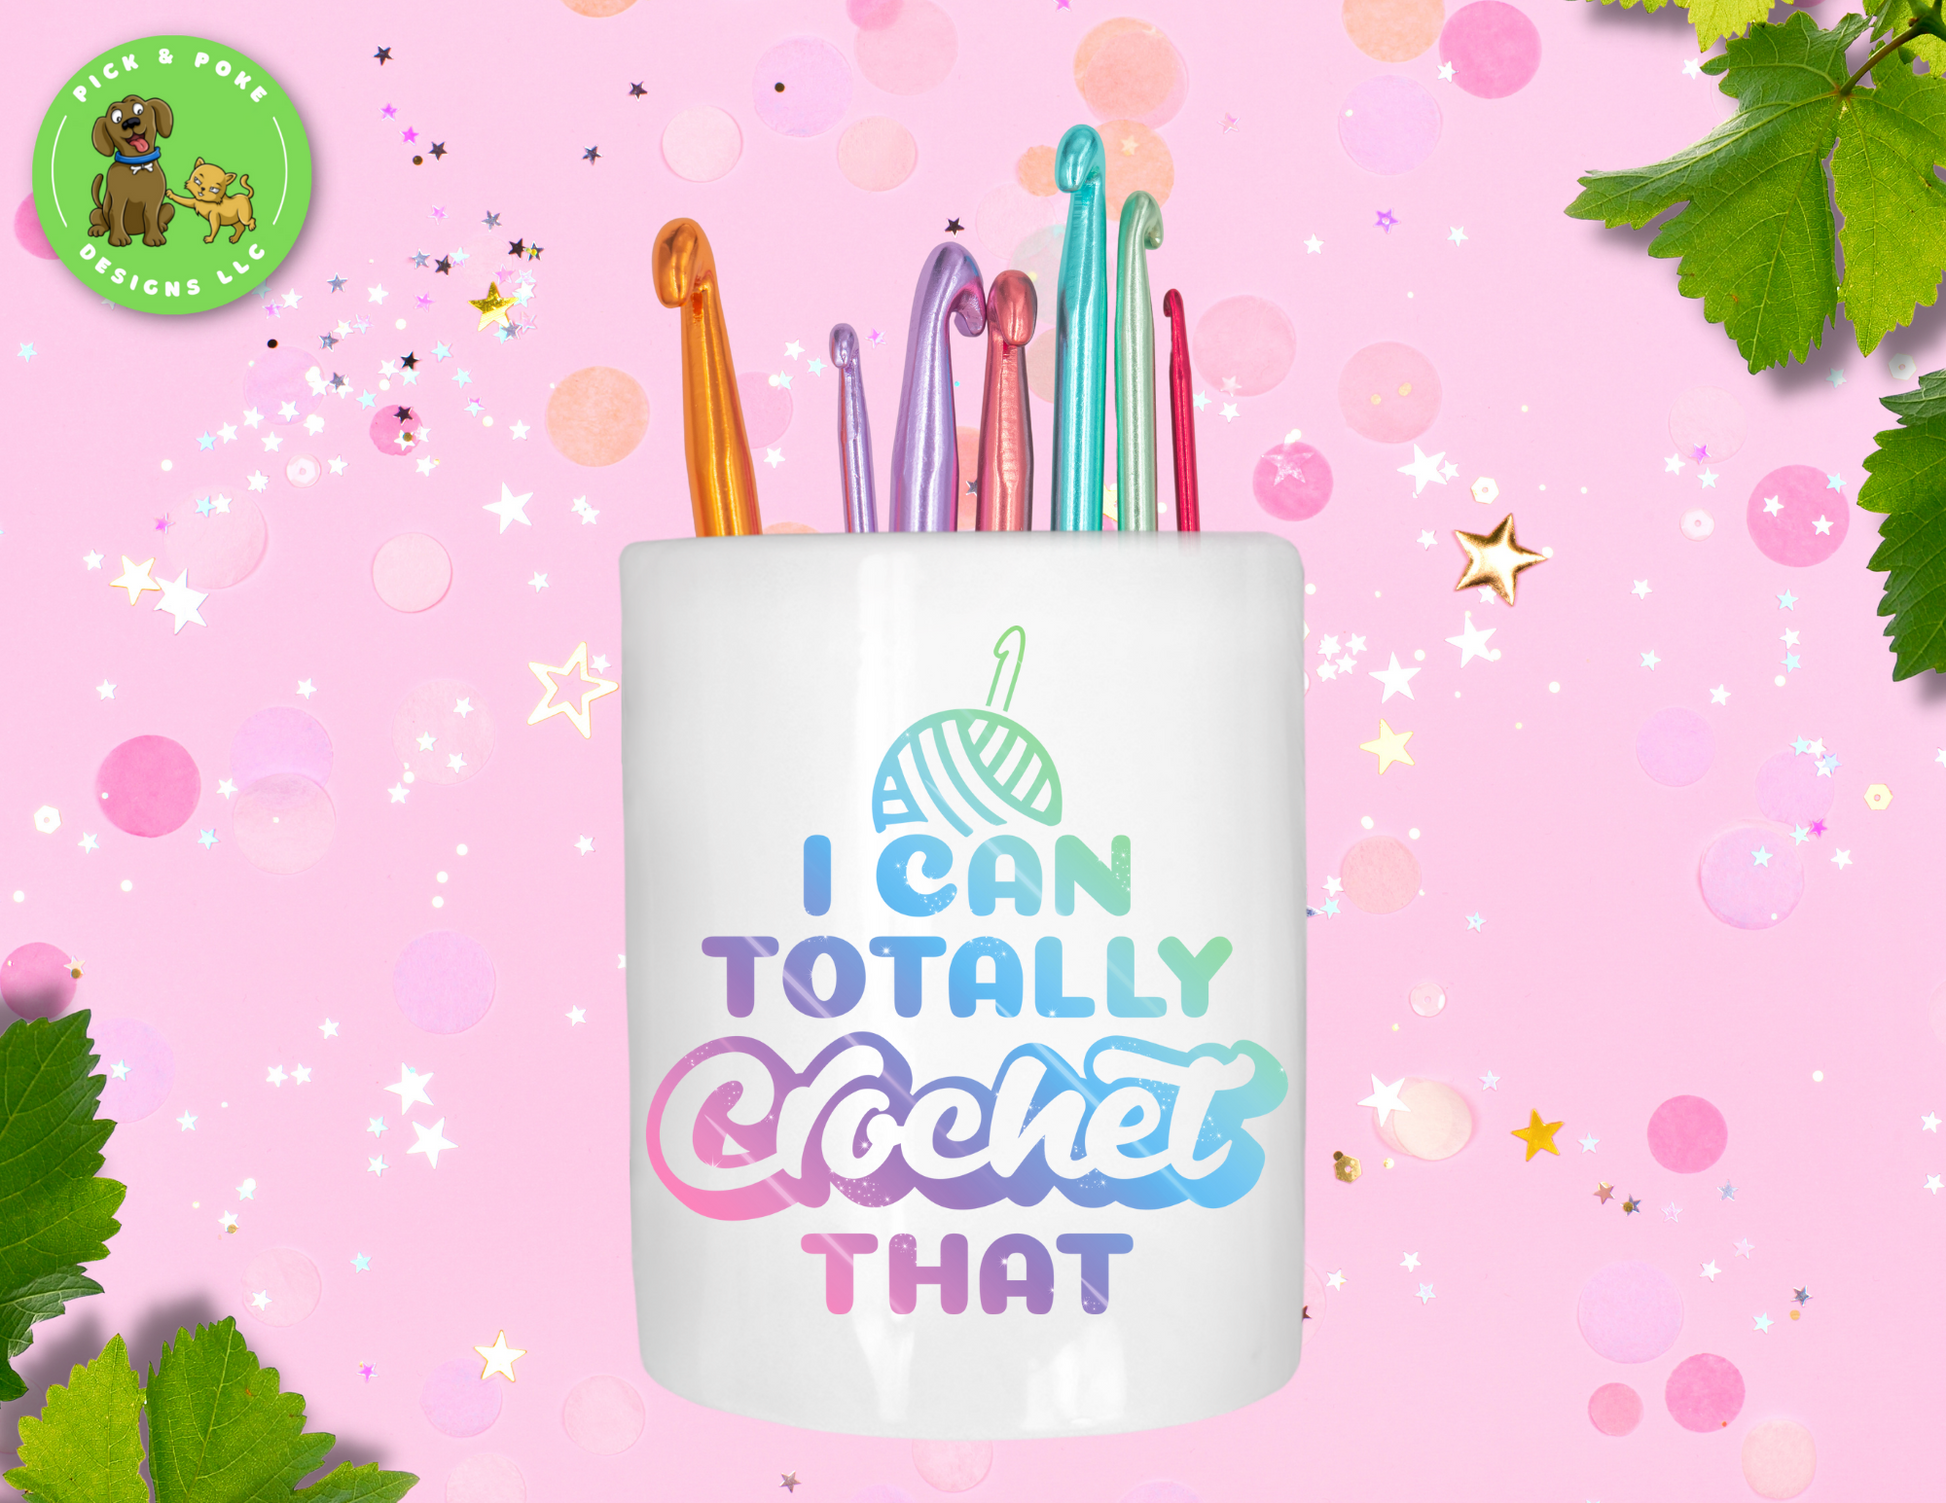 White ceramic pencil holder with the phrase "I can totally crochet that" written in a colorful font.